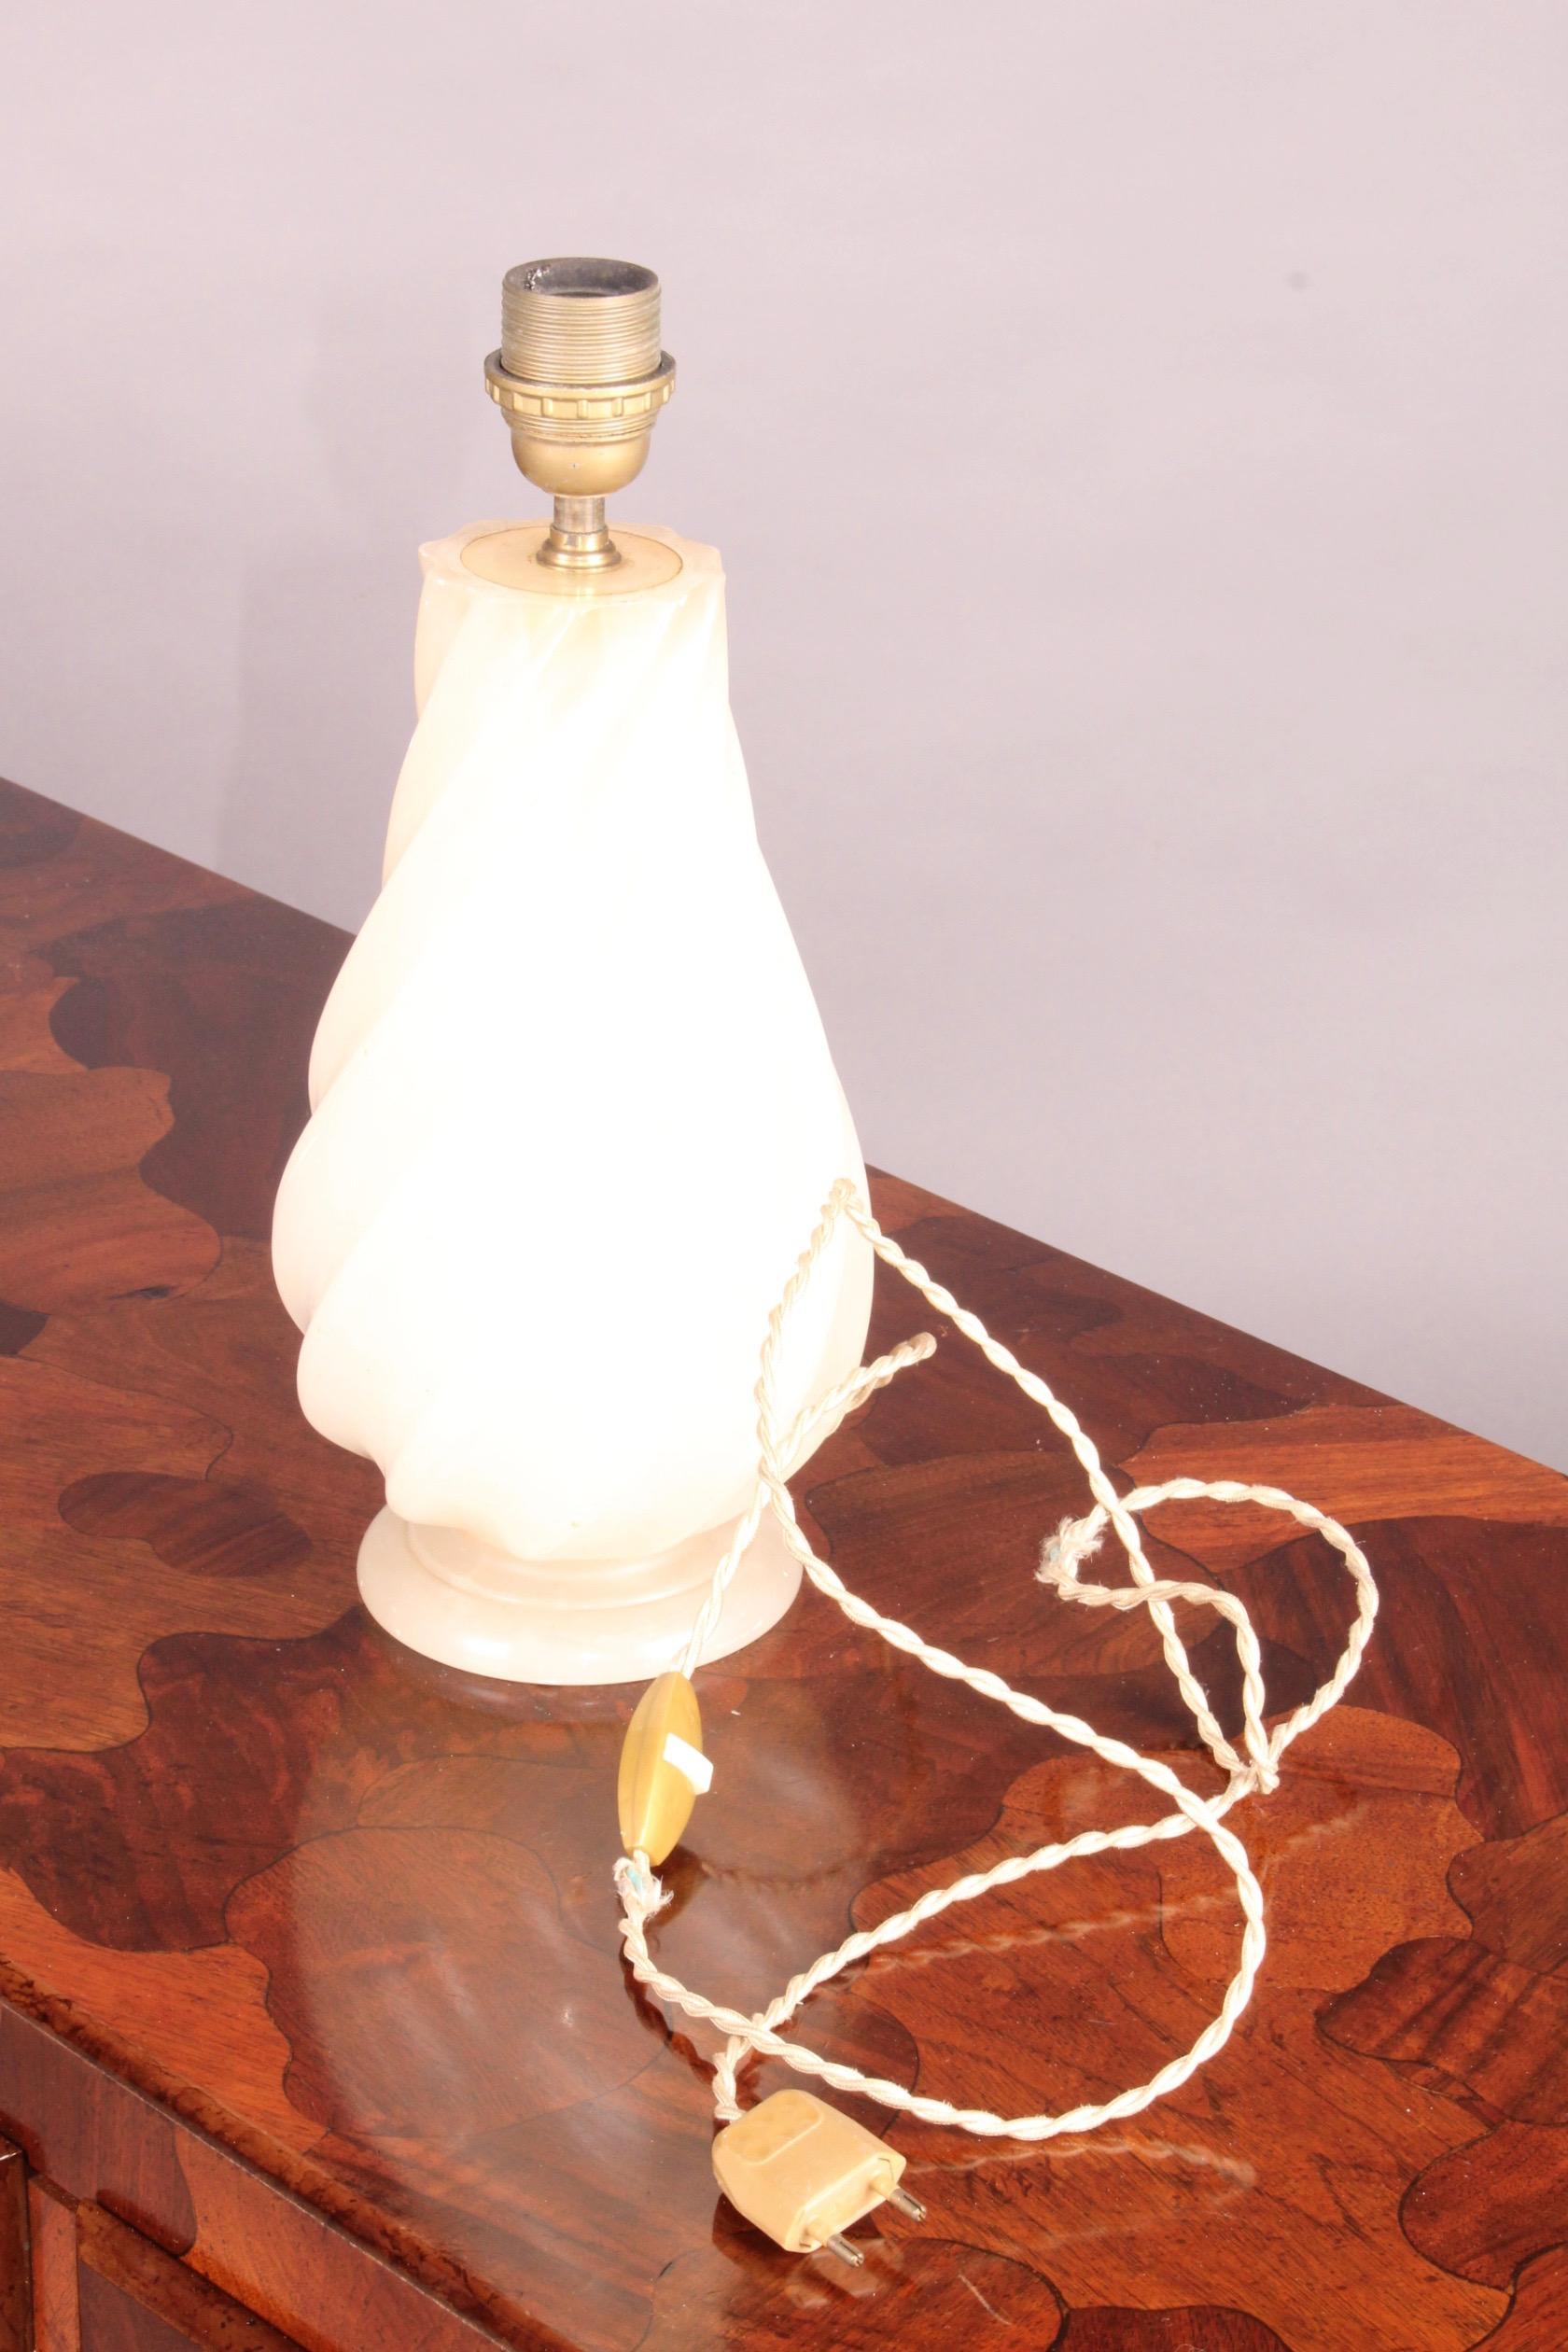 Alabaster table lamp, dimensions without shade height 37, diamanté's 16 cm.